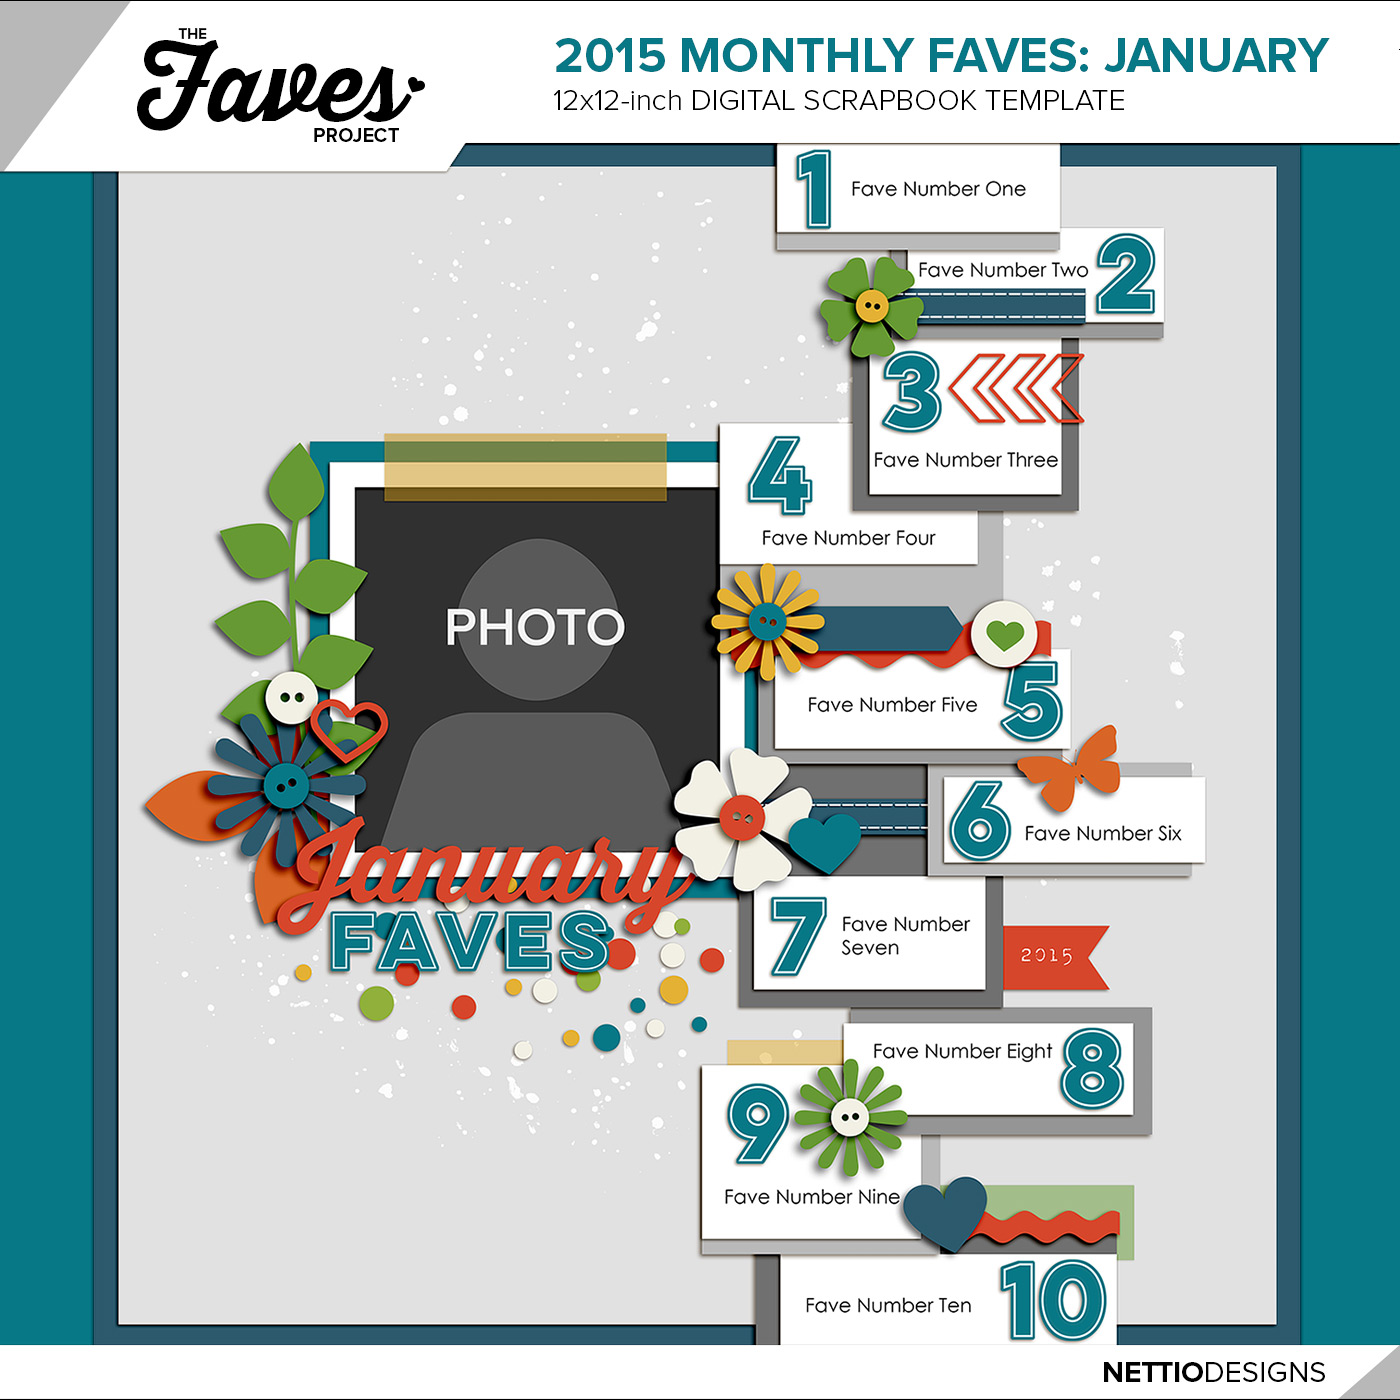 The 2015 Monthly Faves Project: January | NettioDesigns